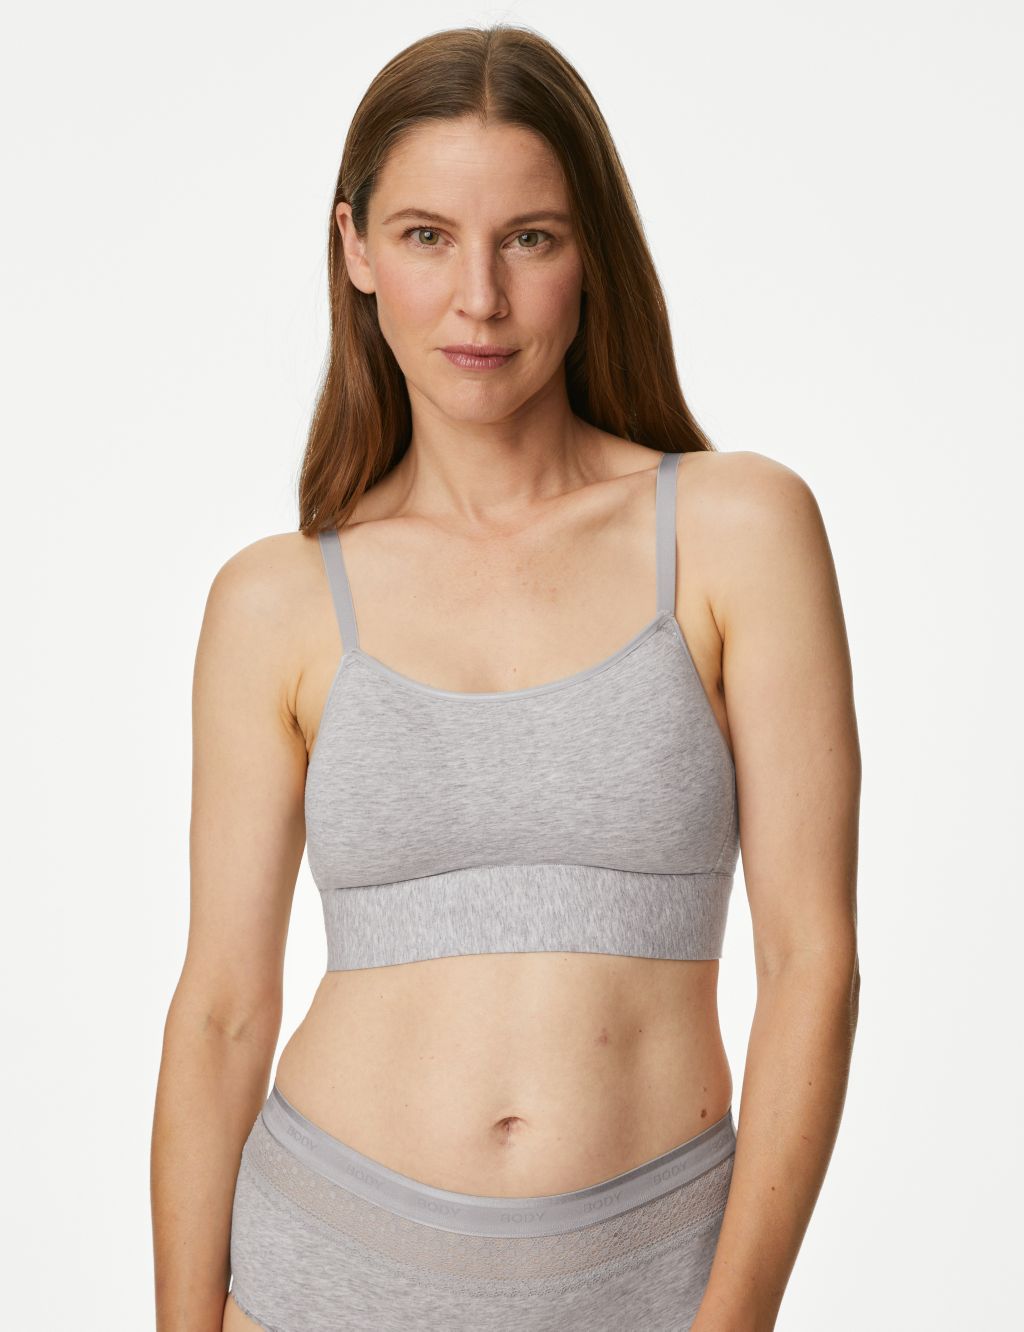 Buy Green, Grey, Pink Bras for Women by BEACH CURVE Online